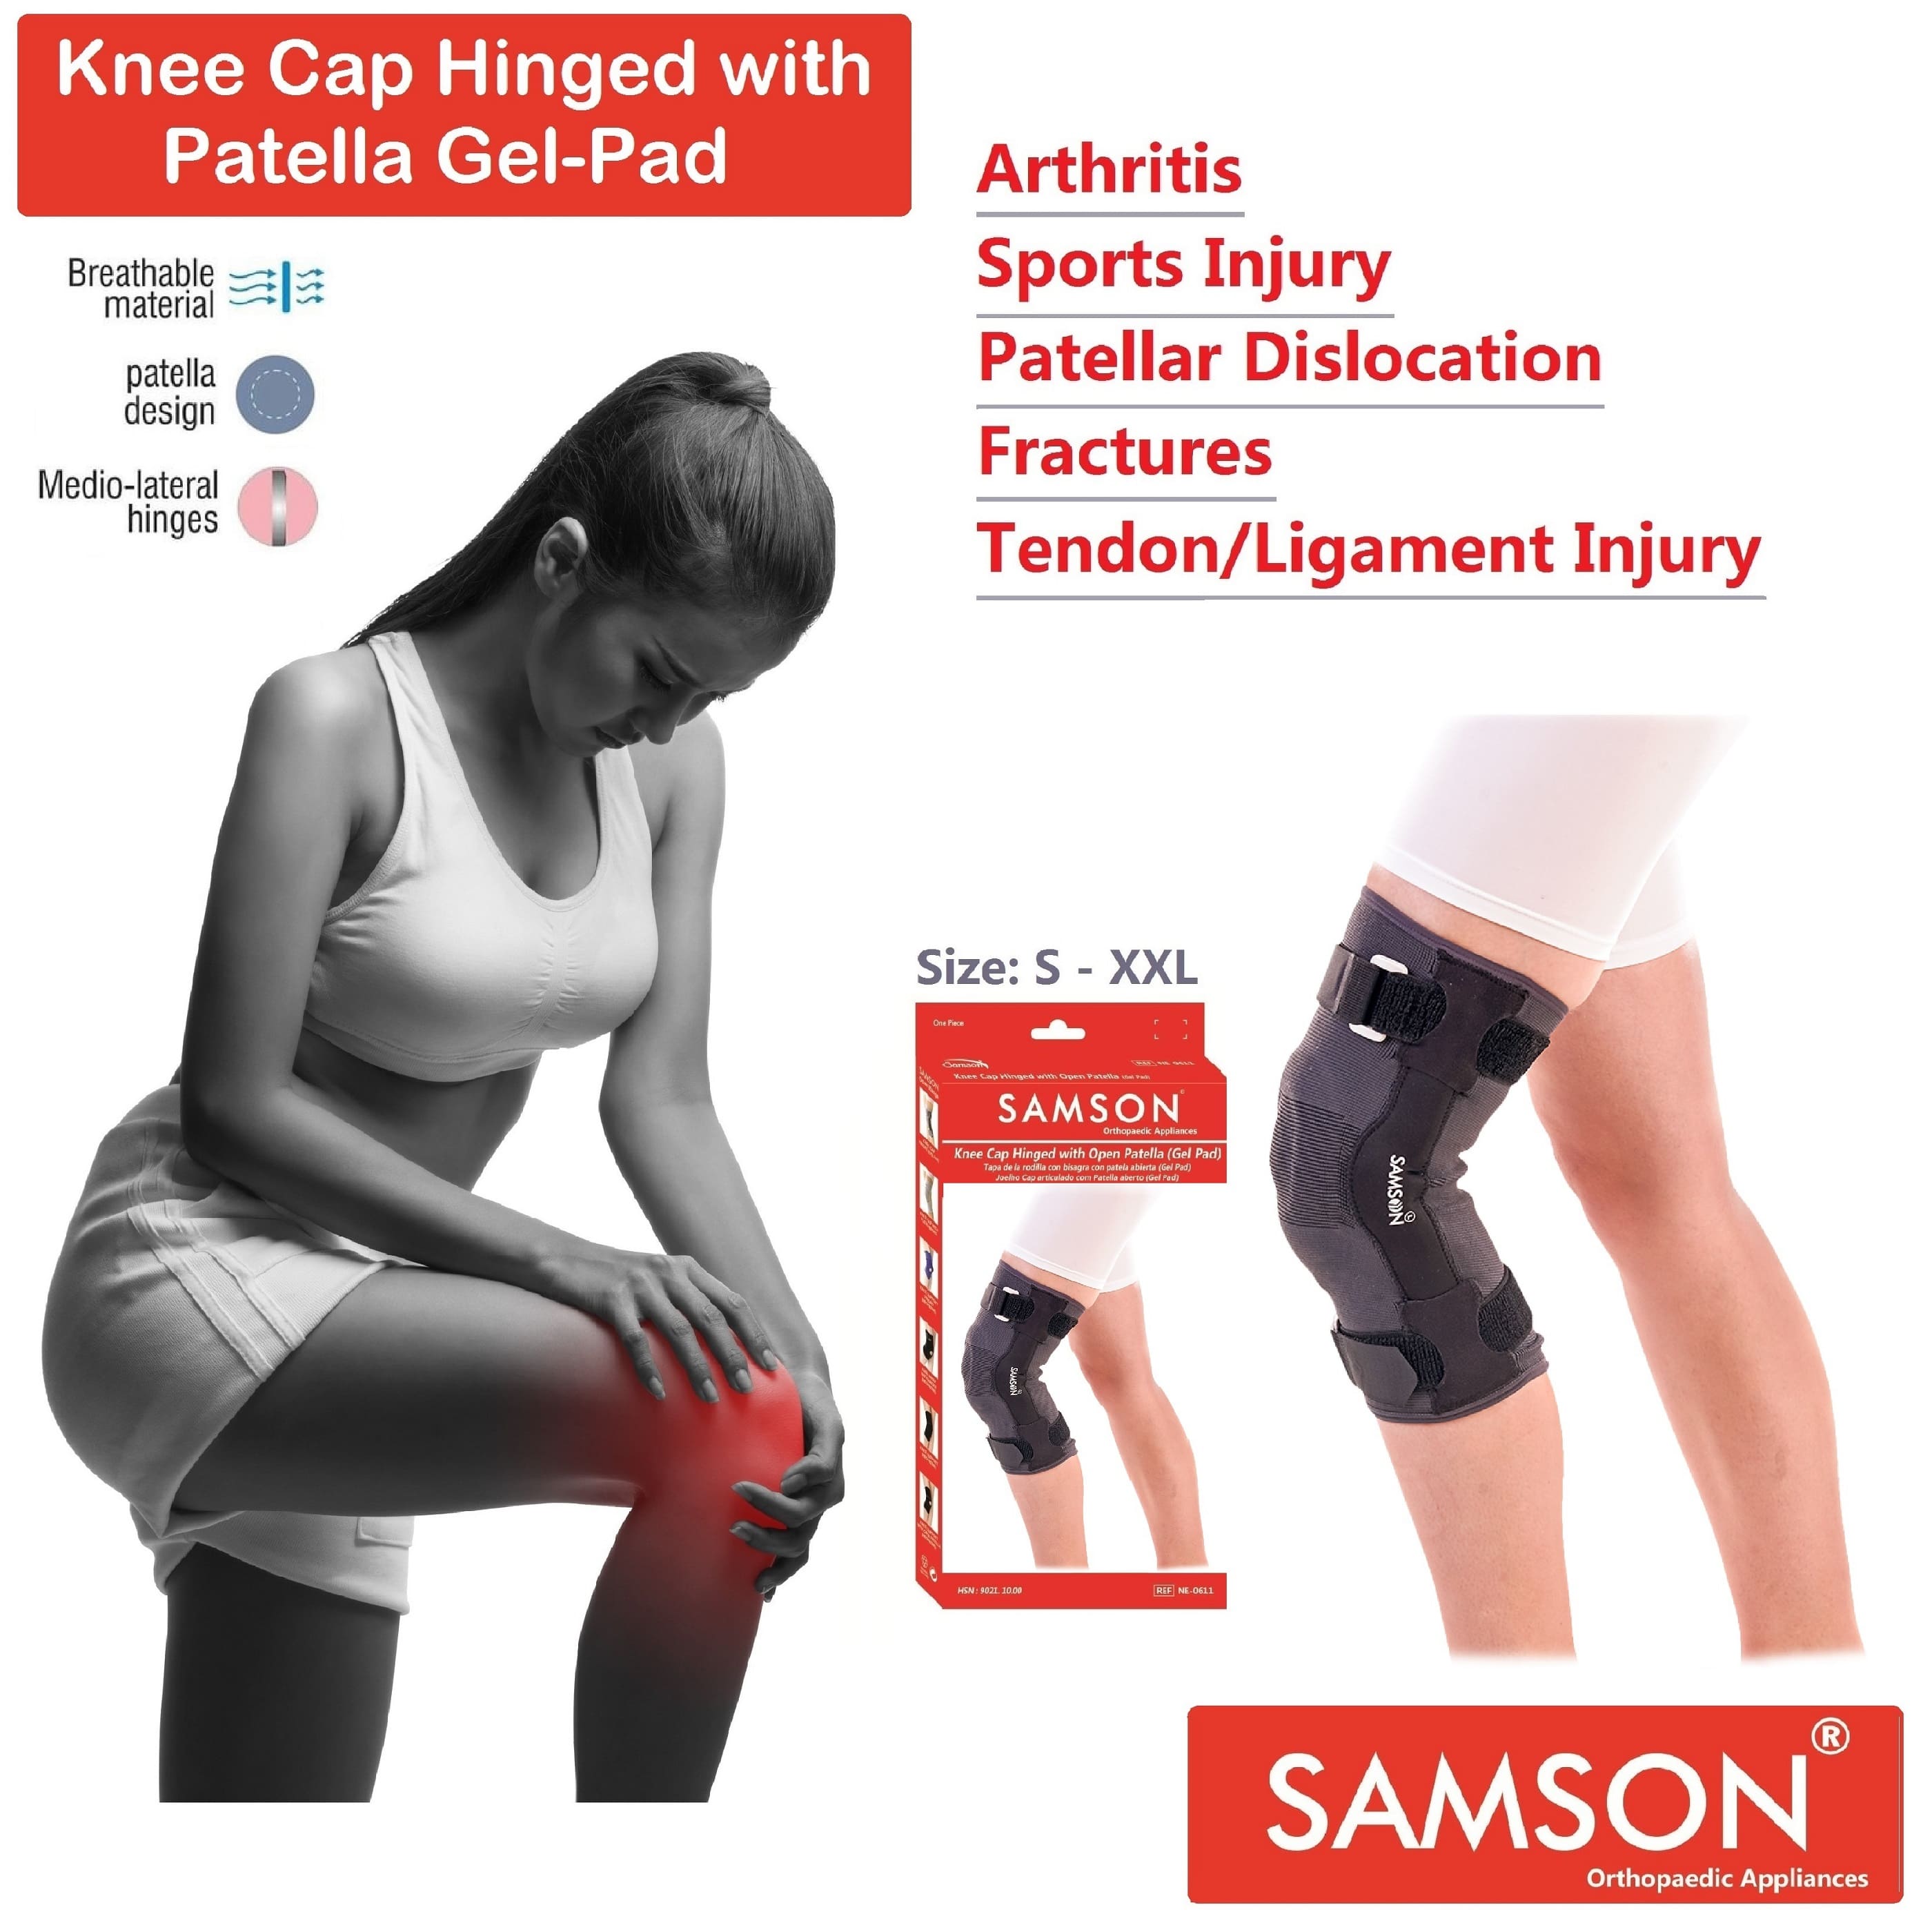 Knee Immobilizer Brace for Men & Women – Post Op Knee Leg Compression,  Stabilizer & Support Wrap for Swollen ACL, MCL, Tendon, Athletic Injury